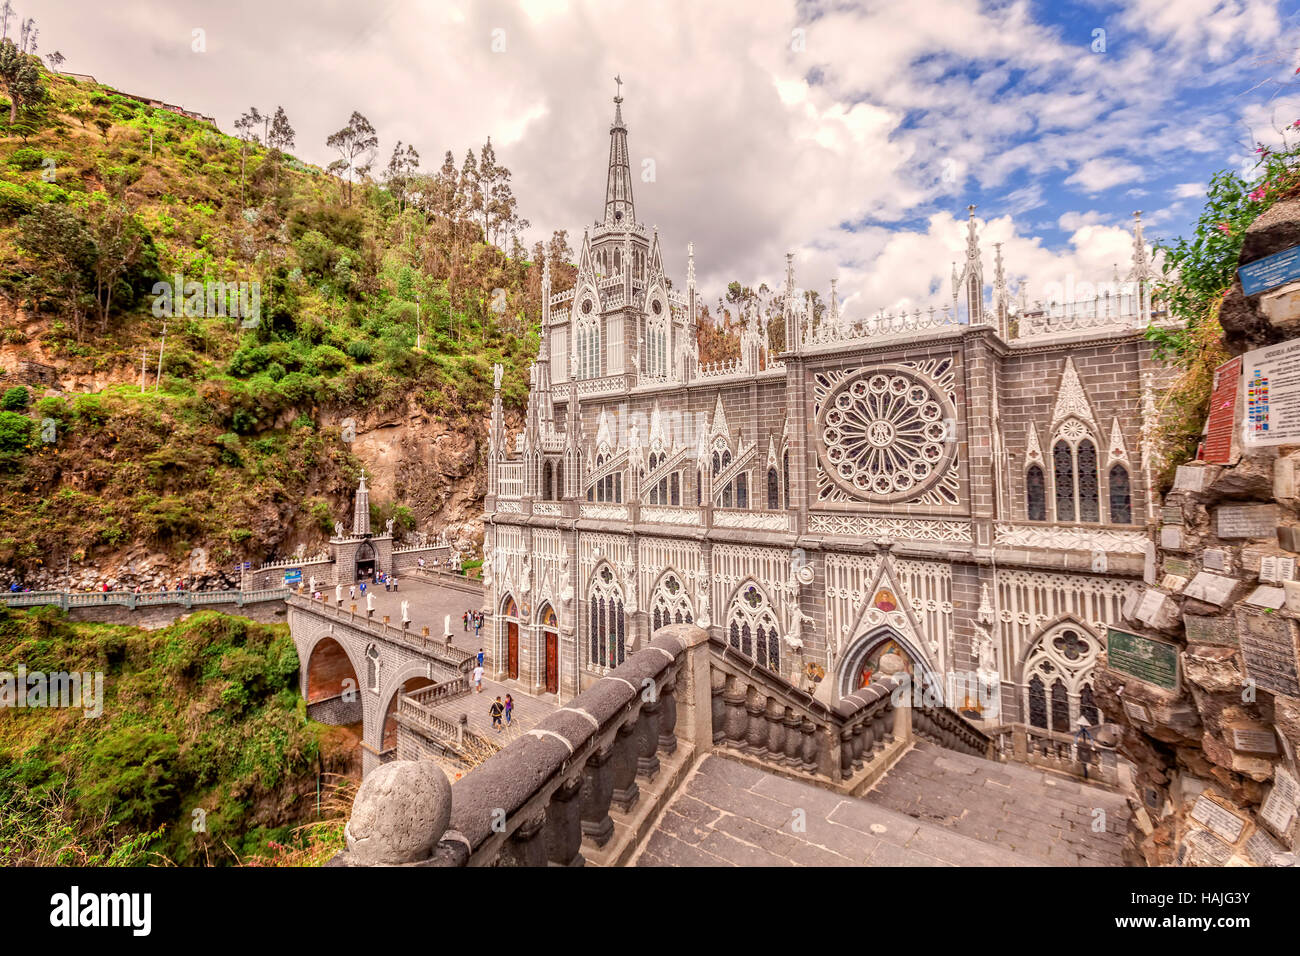 Las Lajas Colombian Catholic Church, Built Between 1916 And 1948 Is A Popular Destination For Religious Believers From All Part Of Latin America Stock Photo